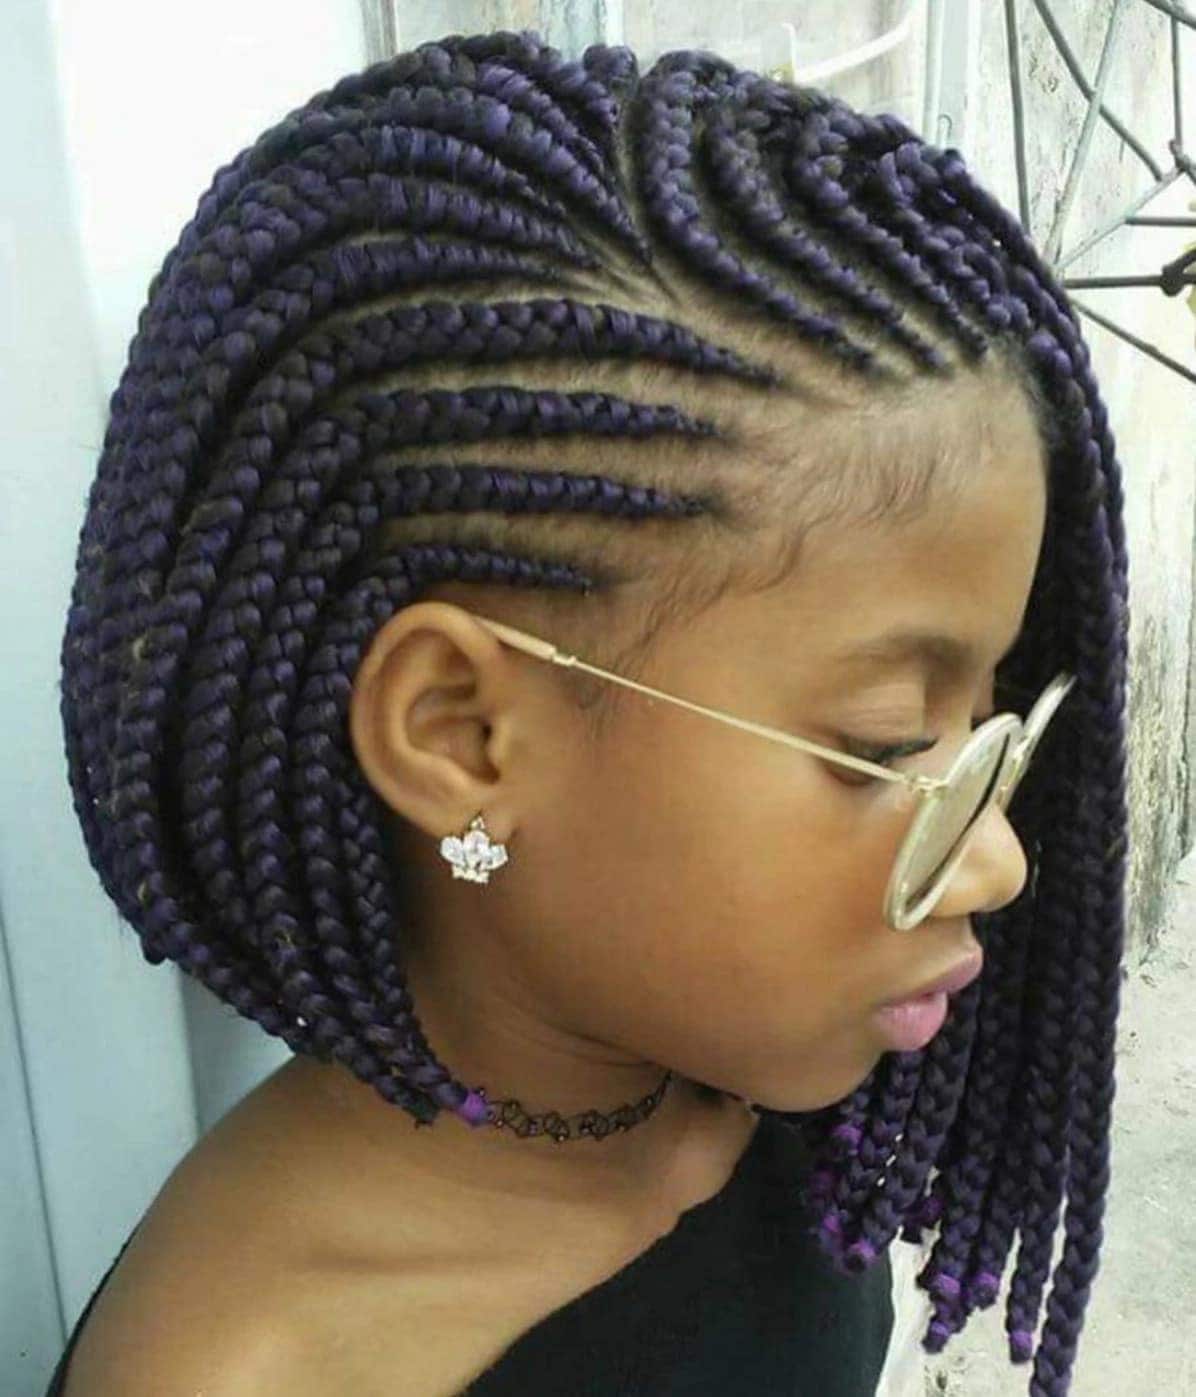 Ghanian Lines & Braids | A happy client served; Ghanian Lines in the front,  braids in the back. The braids were curled with hot water and styled. All  for KES1000 as a